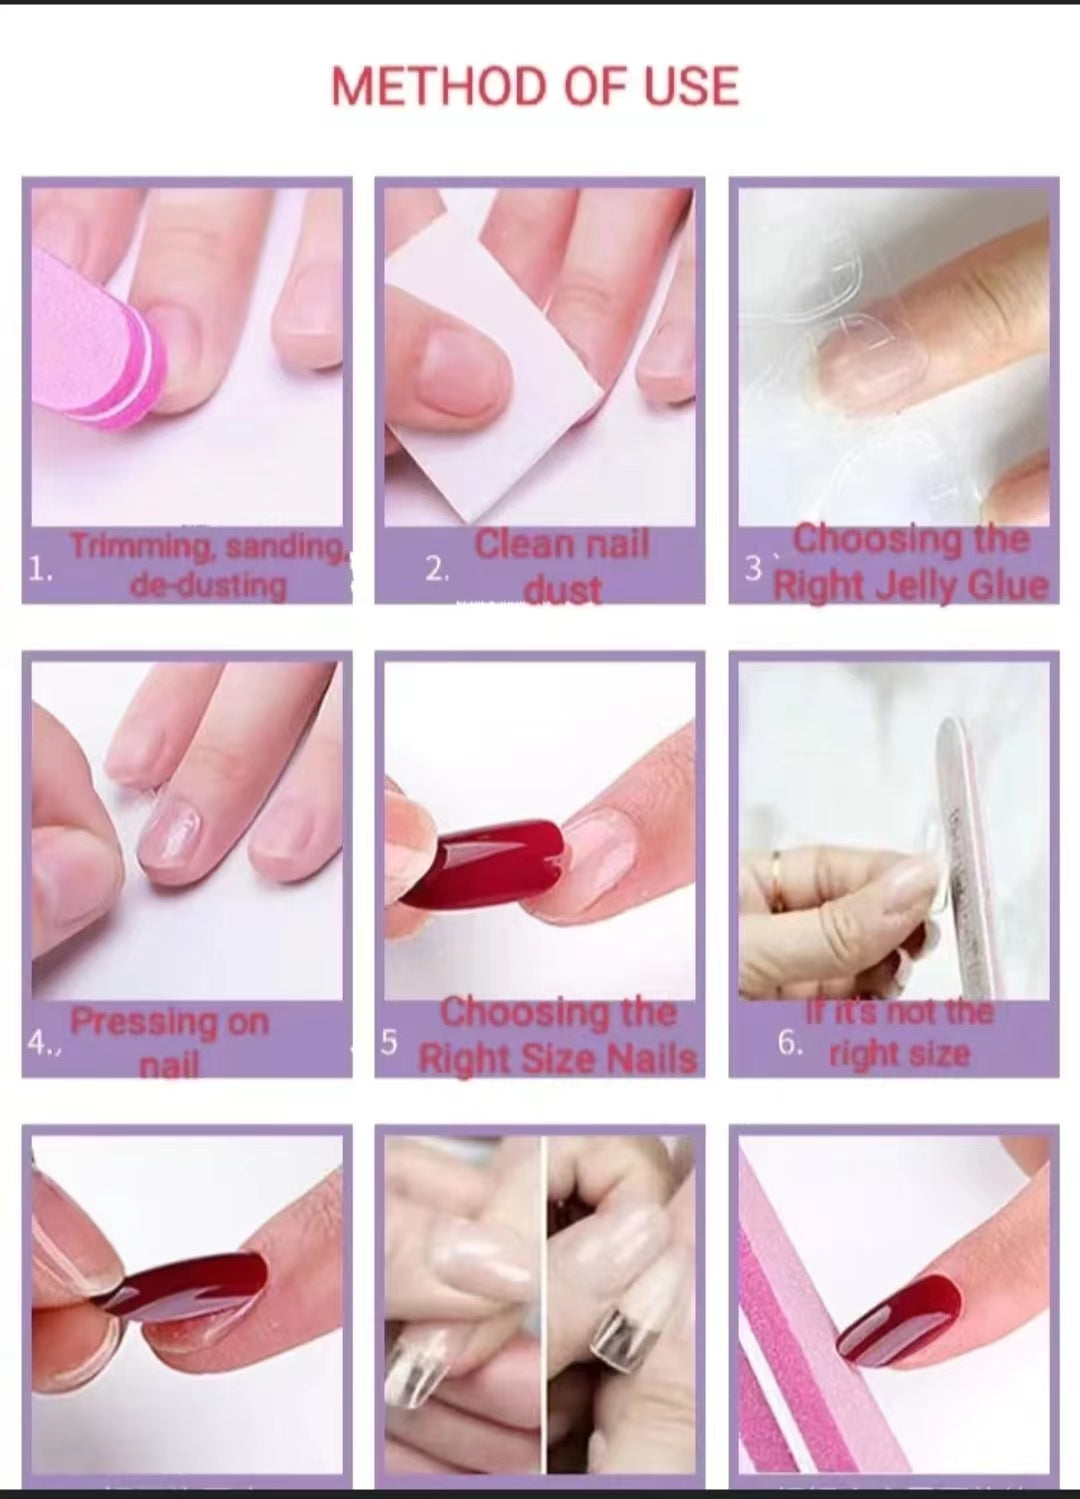 Wearing nail by hand, the finished patch shows white pink snake false nail, which can be worn by pregnant women and can be removed